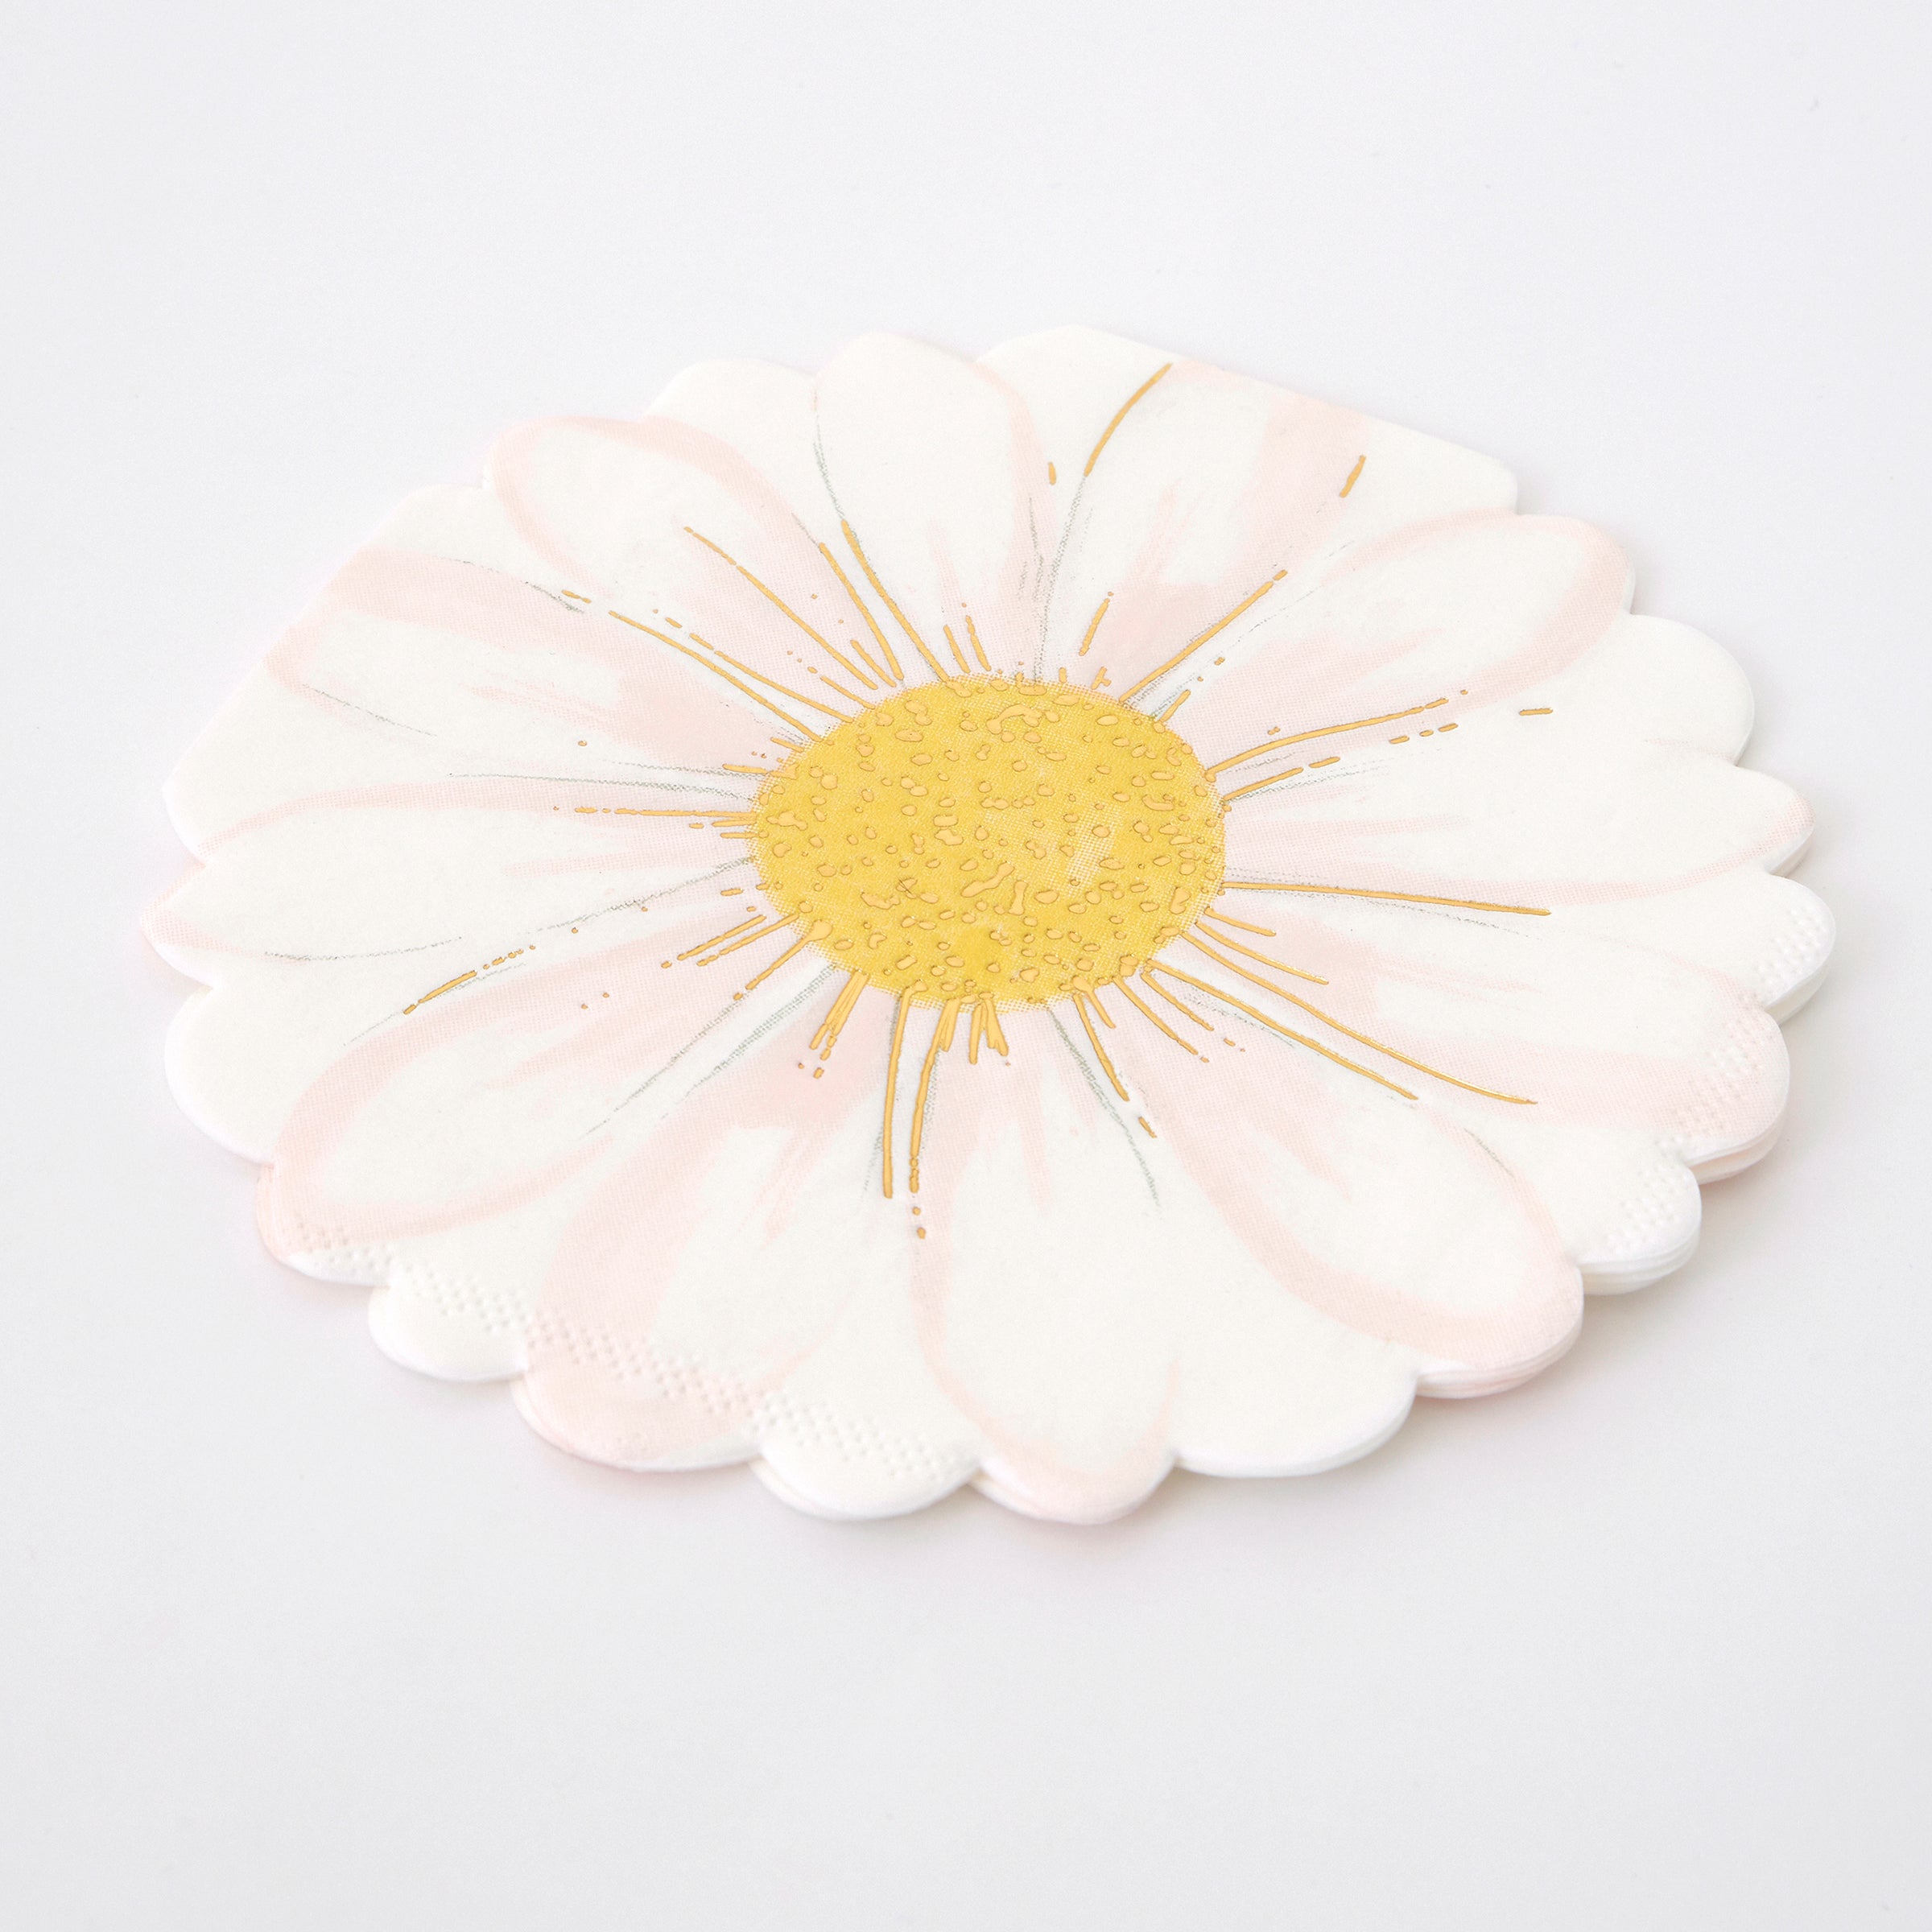 Our flower napkins, beautifully illustrated to look like daisies, have stylish shiny gold foil details.